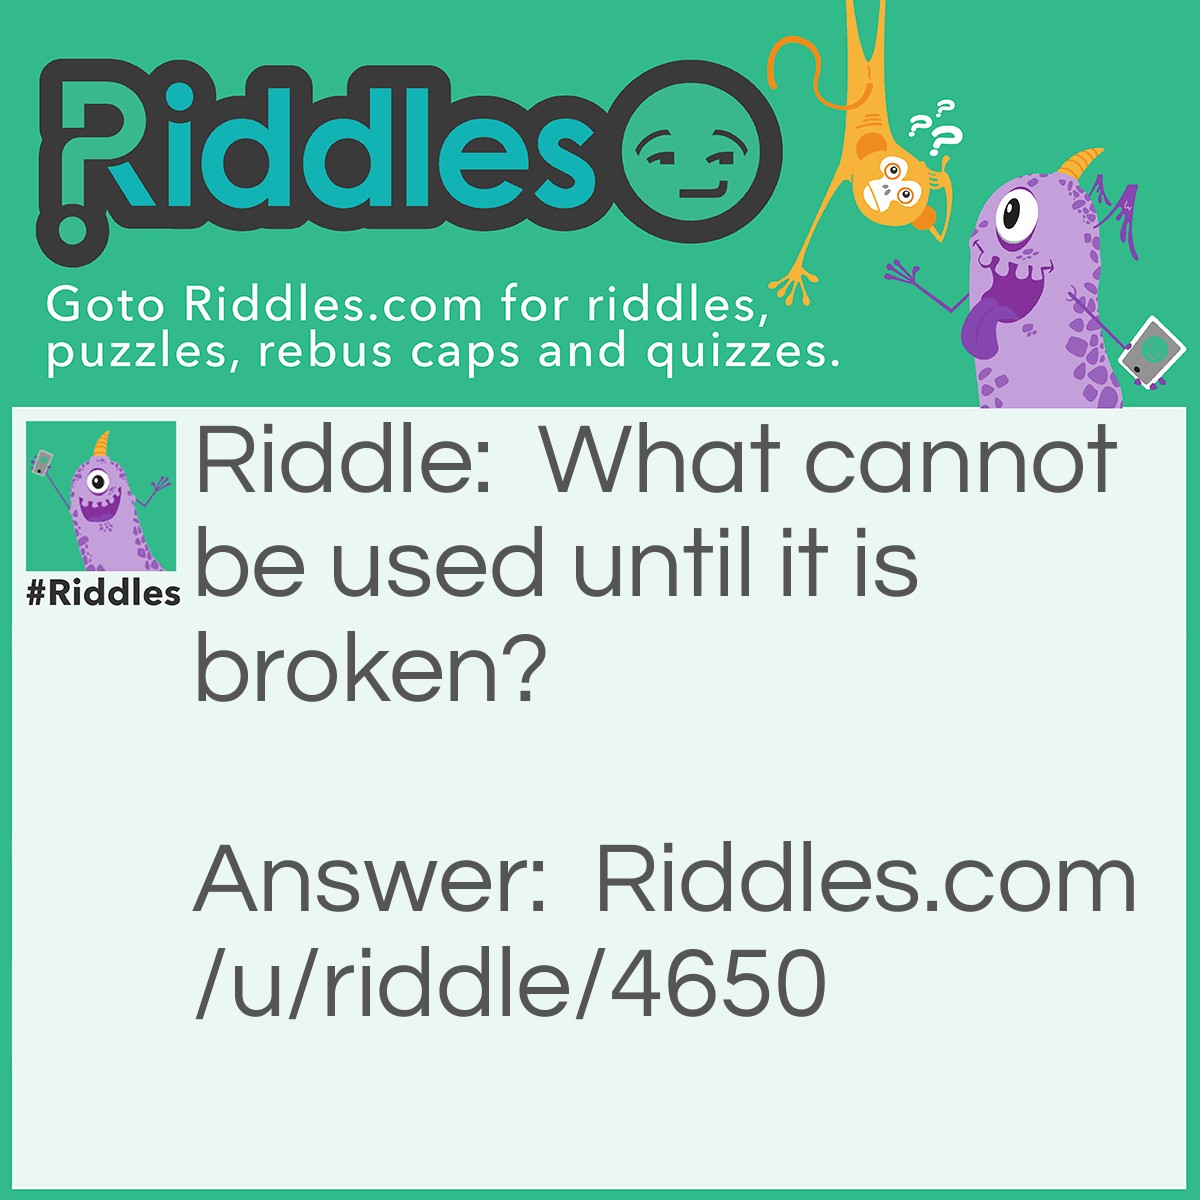 Riddle: What cannot be used until it is broken? Answer: A glowstick.